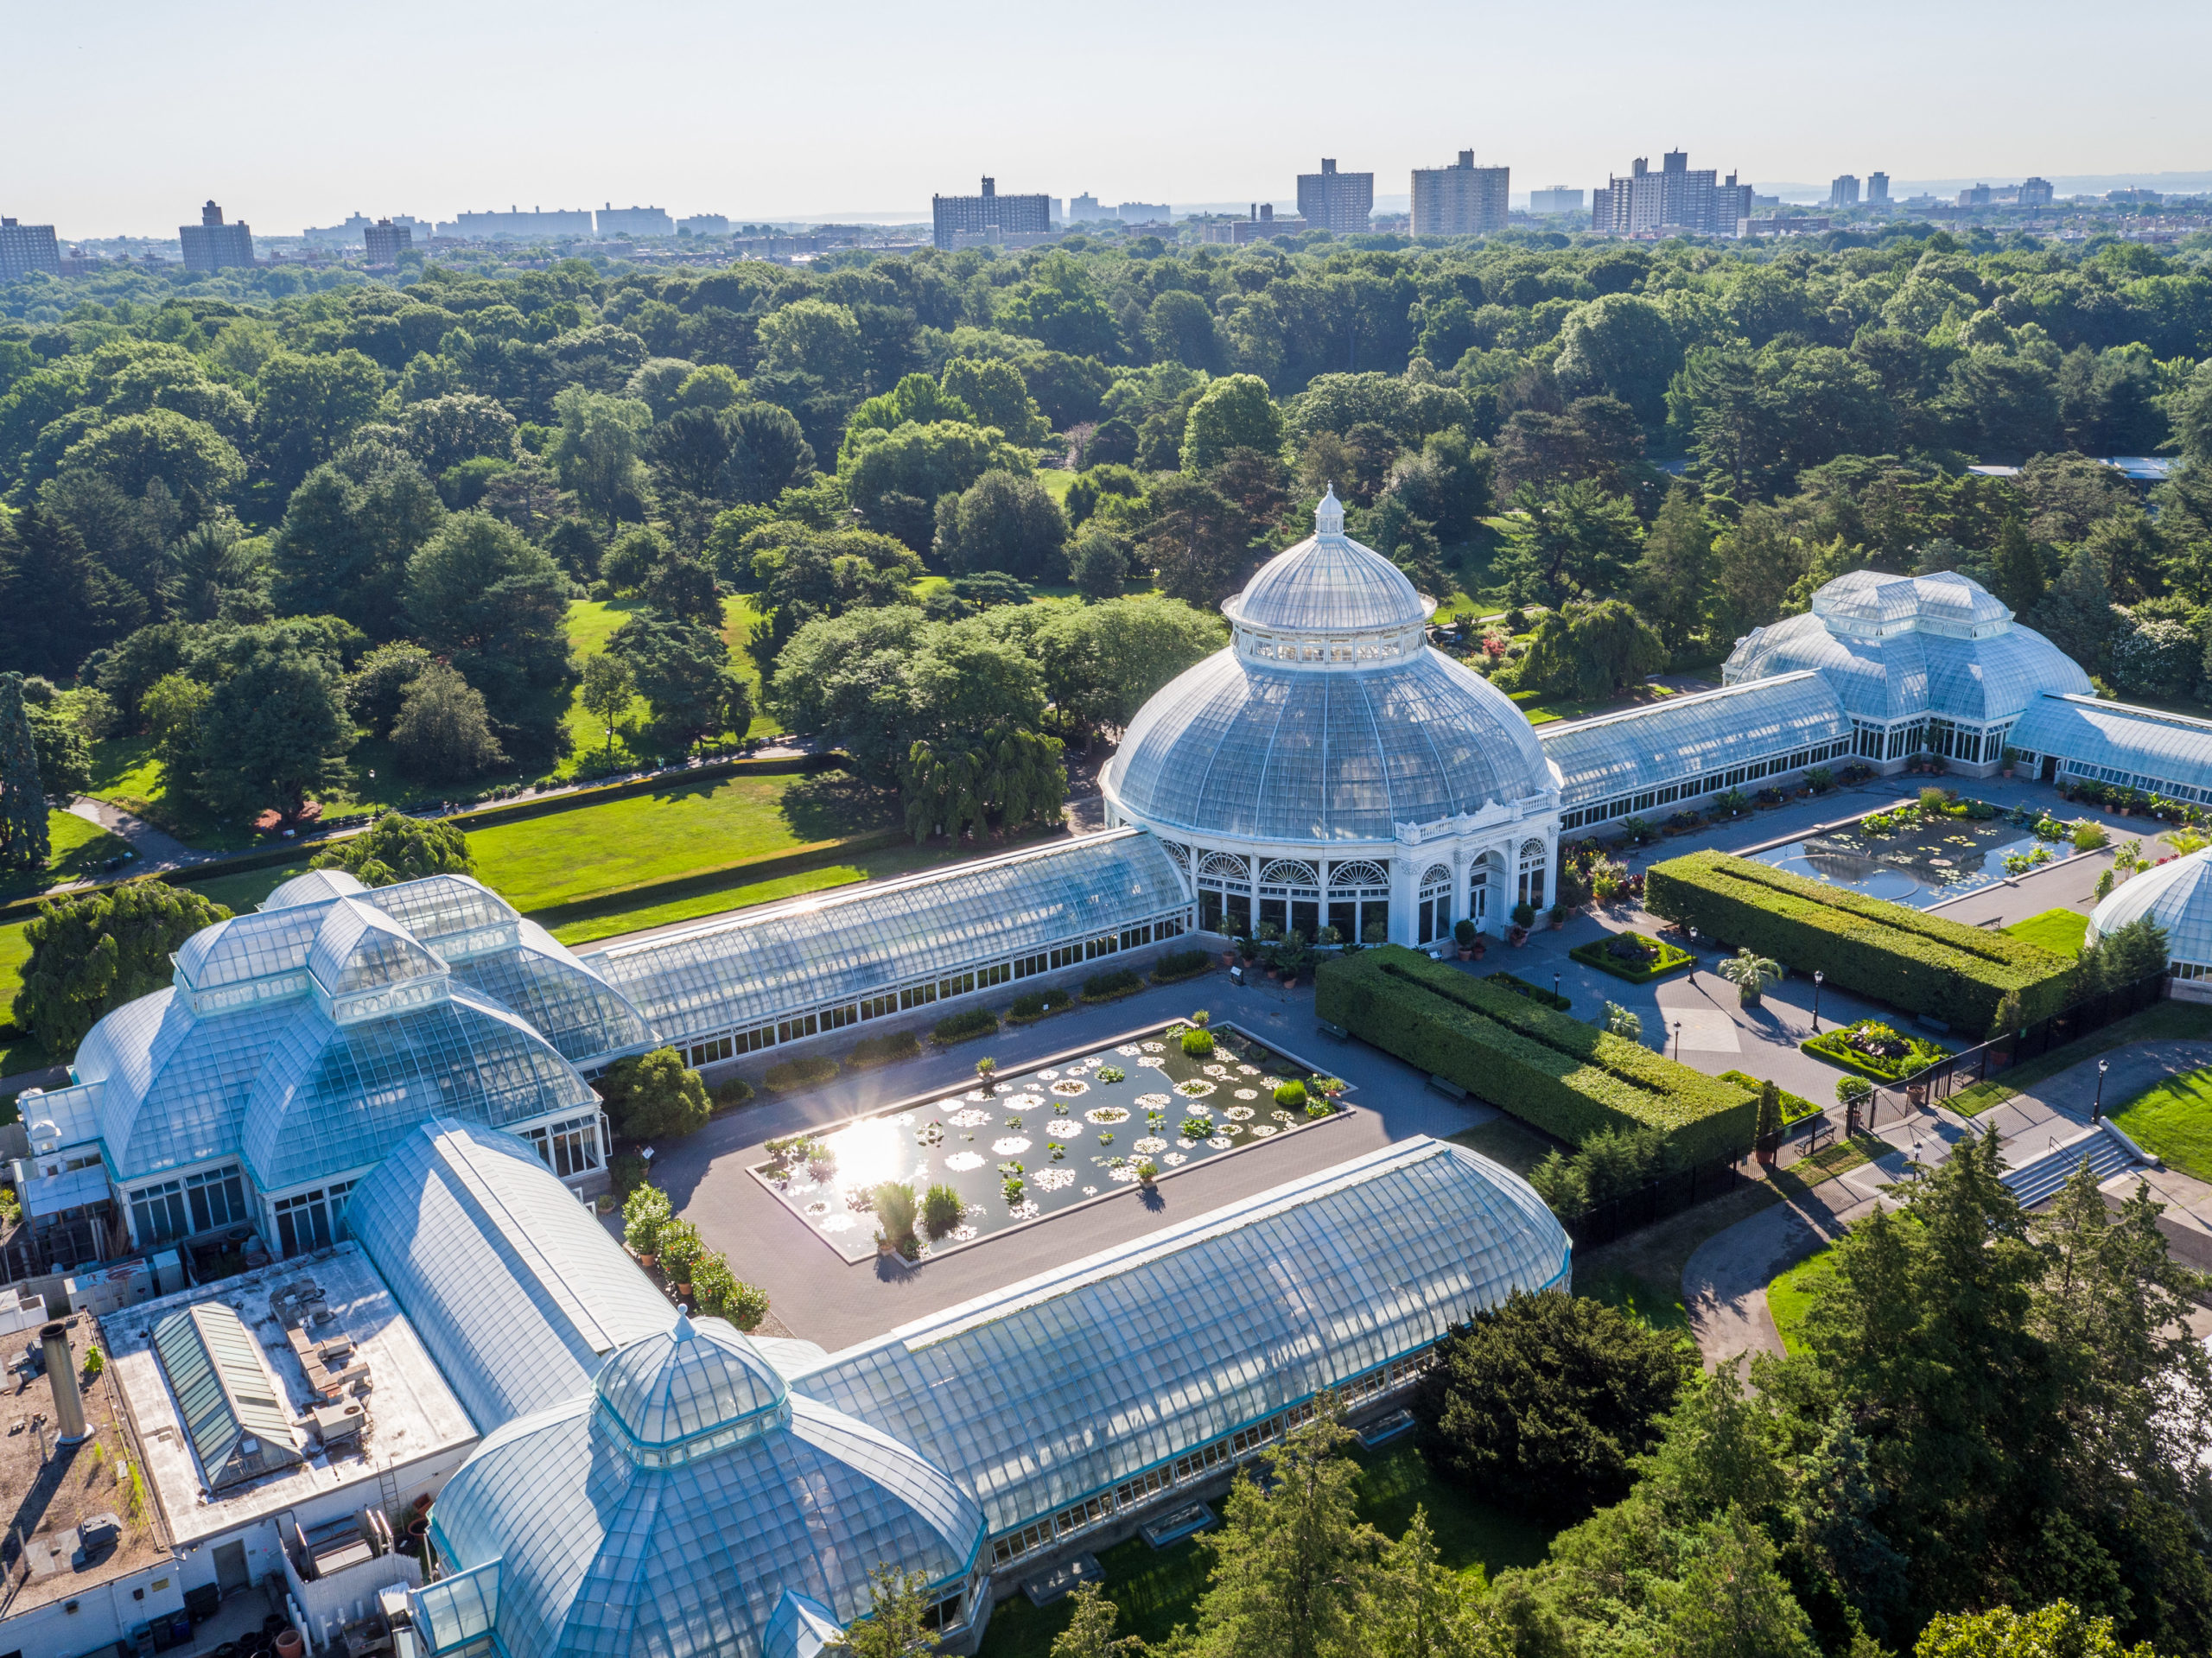 An aerial view of the NYBG conservatory